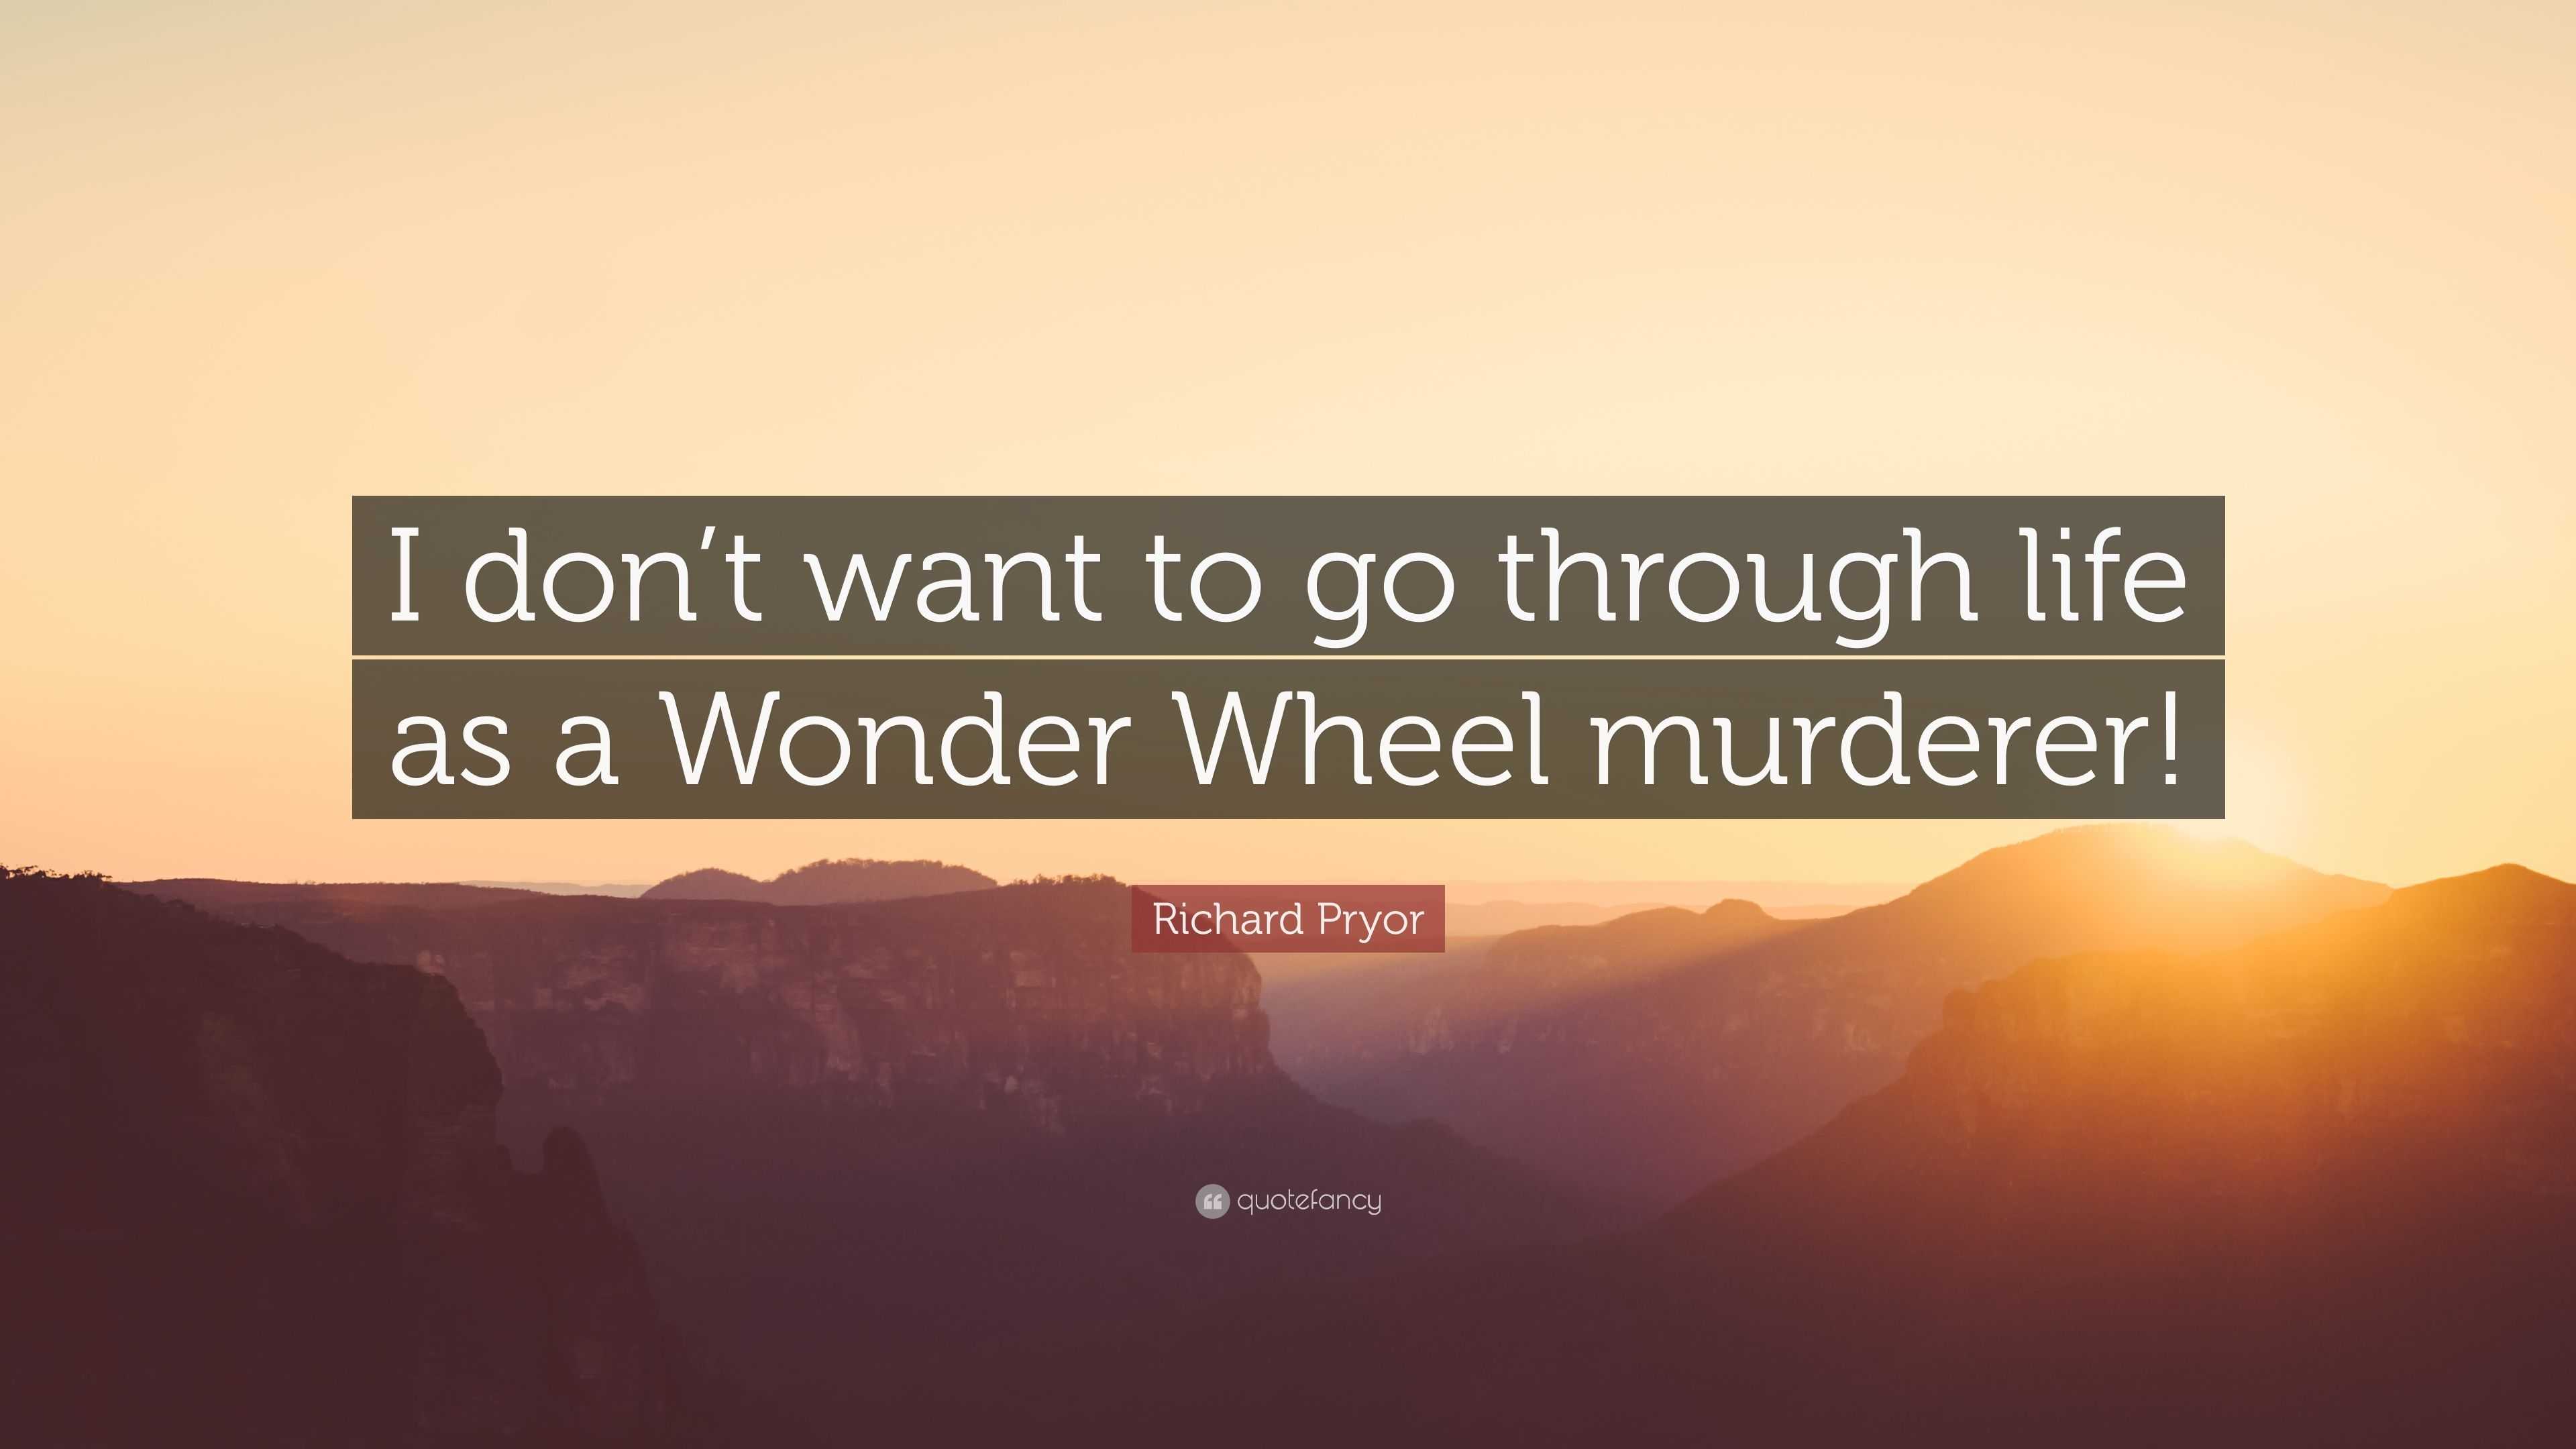 Richard Pryor Quote: “I don’t want to go through life as a Wonder Wheel ...